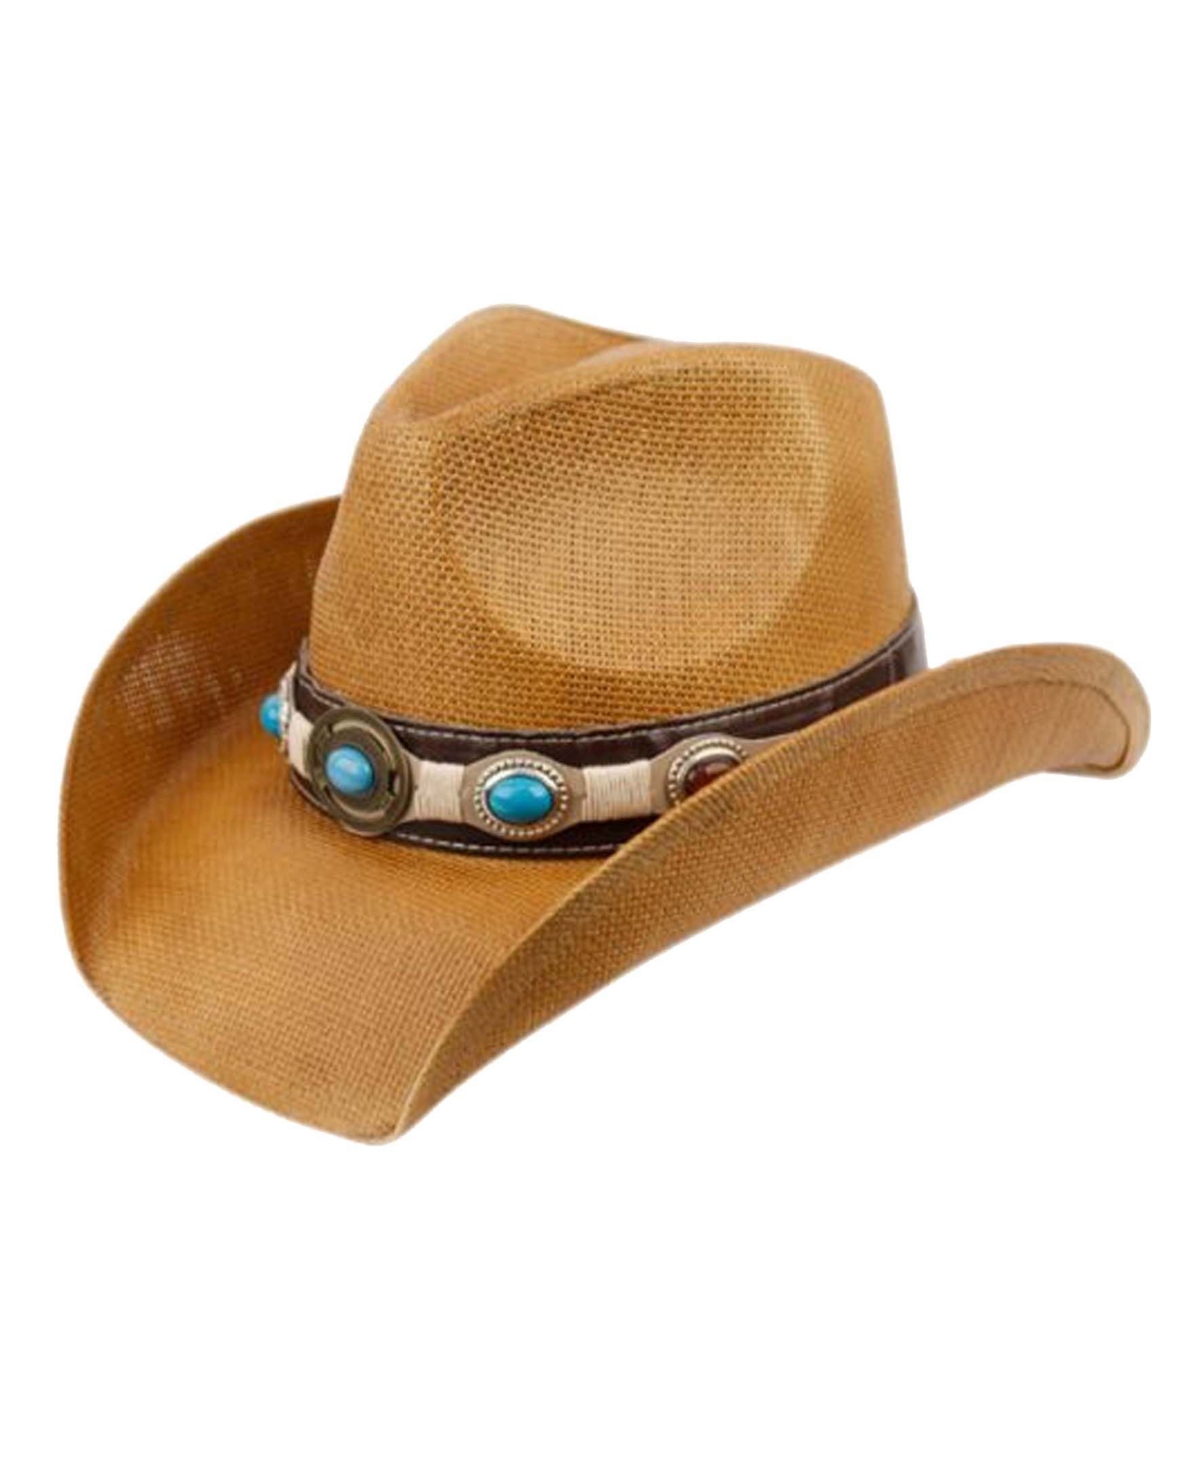 Angela & William Cowboy Hat with Trim Band and Studs - Natural